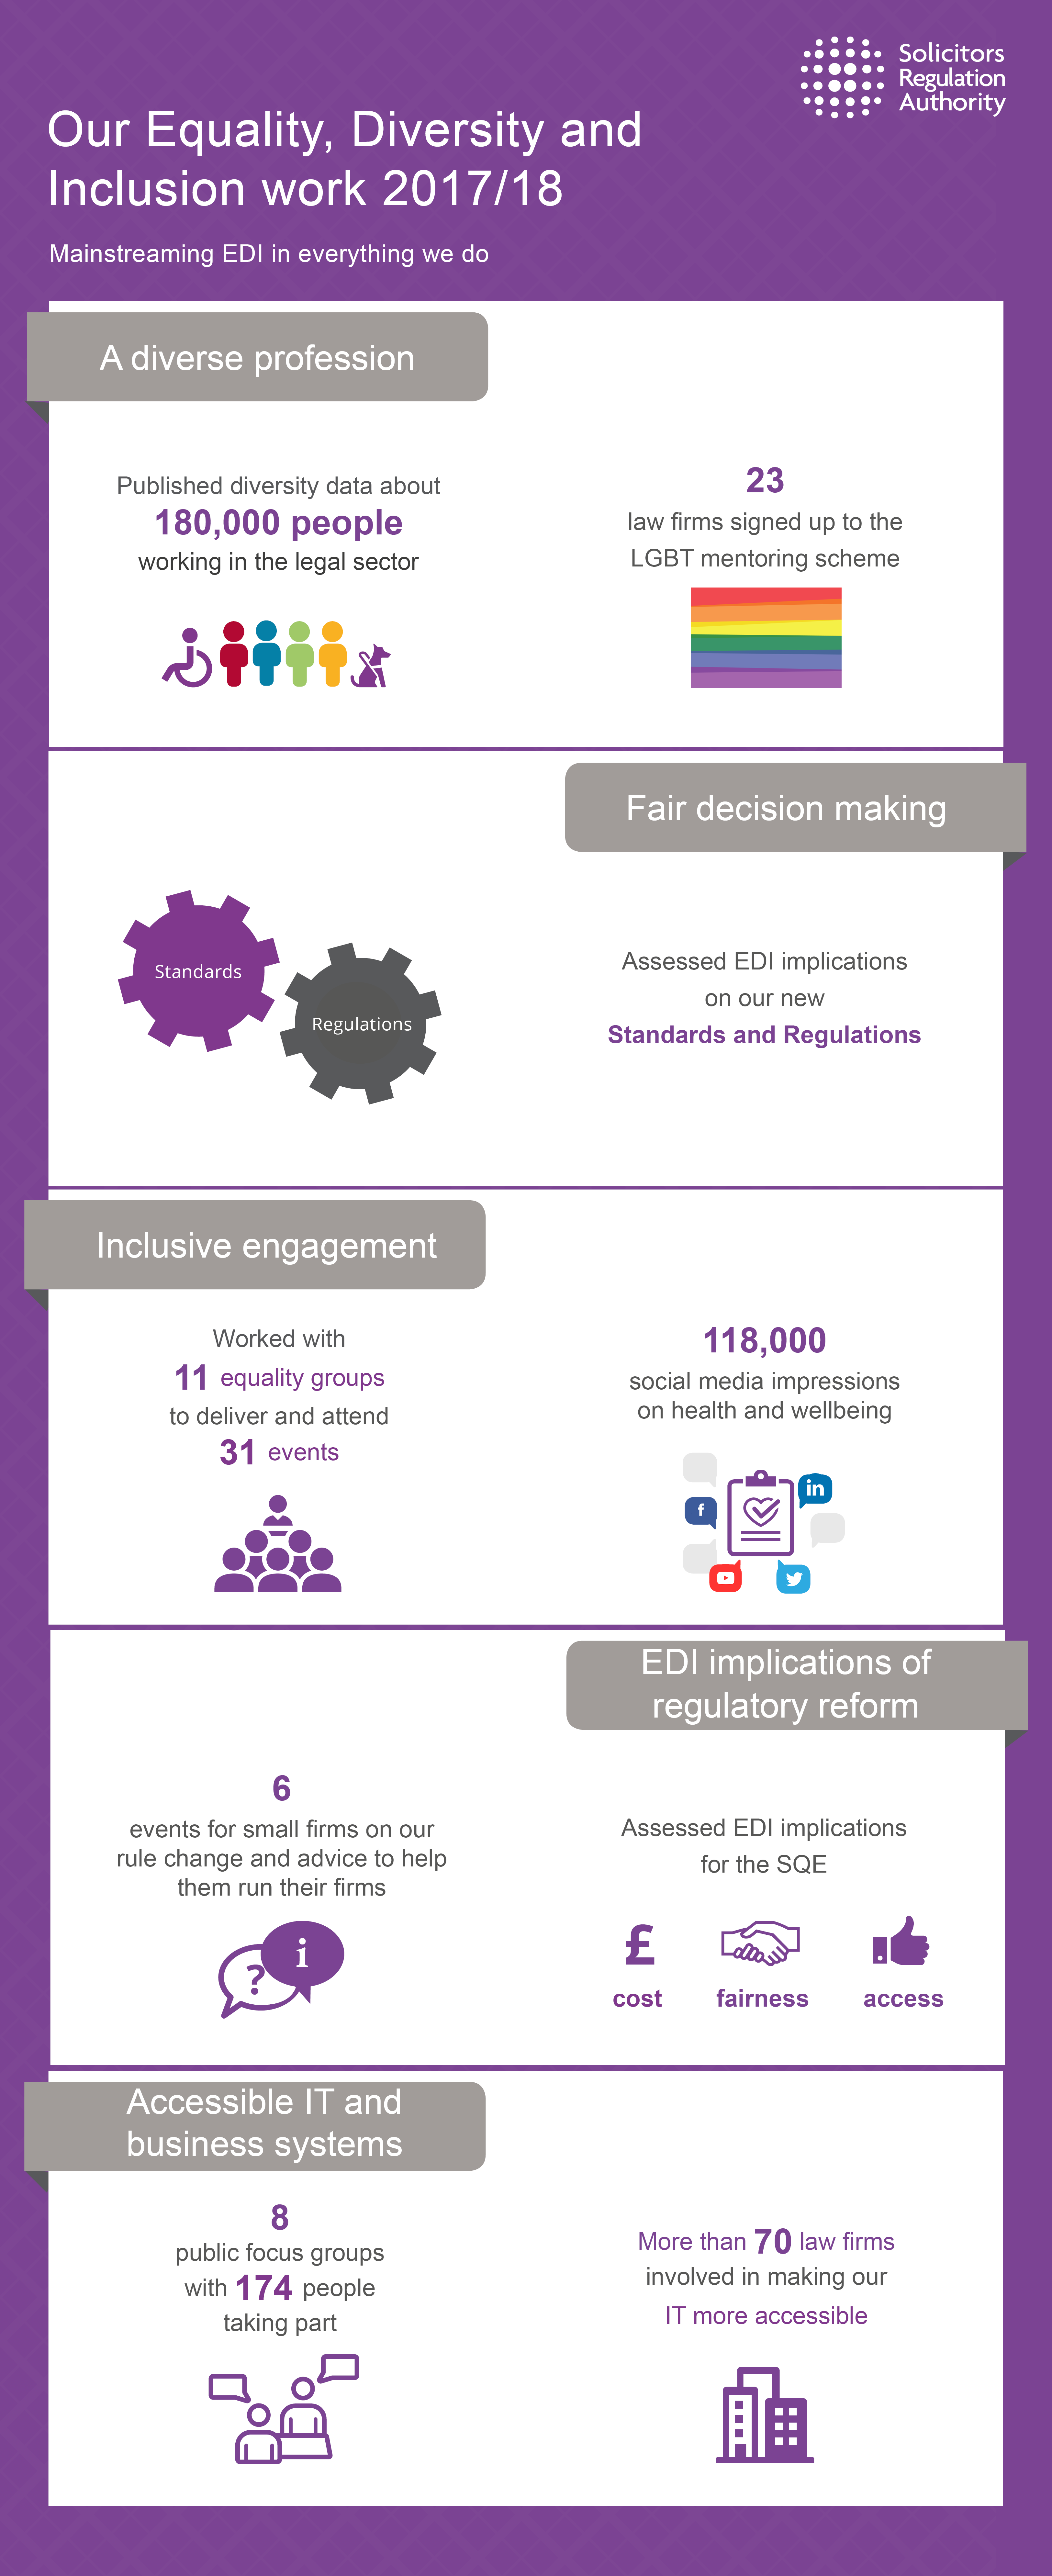 Infographic of the work done by our Equality, Diversity and Inclusion team in 2017 and 2018